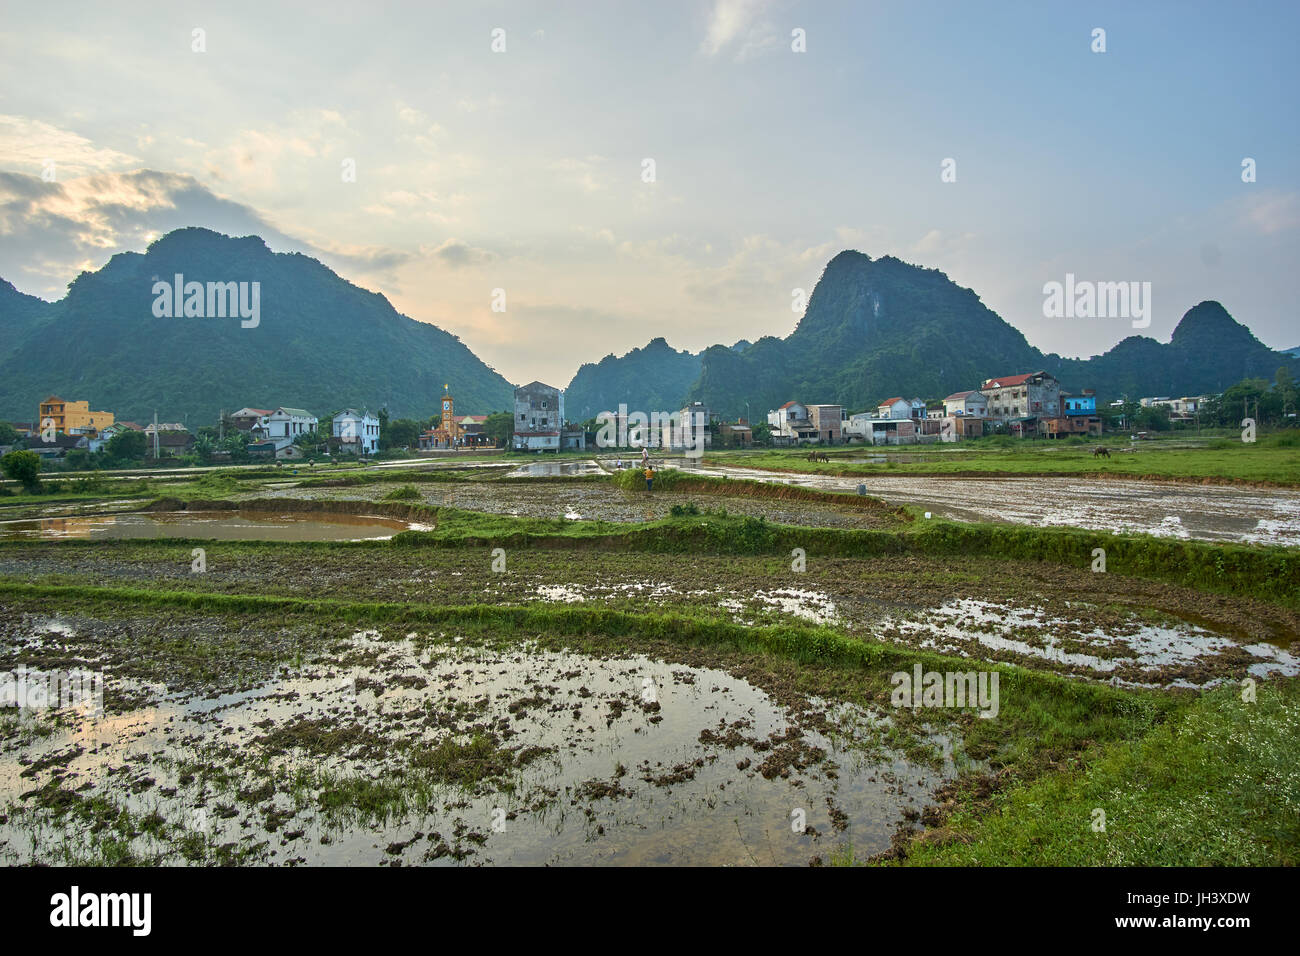 Rice fiels near sunset with mountains in the background in Phong Nha Ke Bang national park, Vietnam. With copyspace. Stock Photo